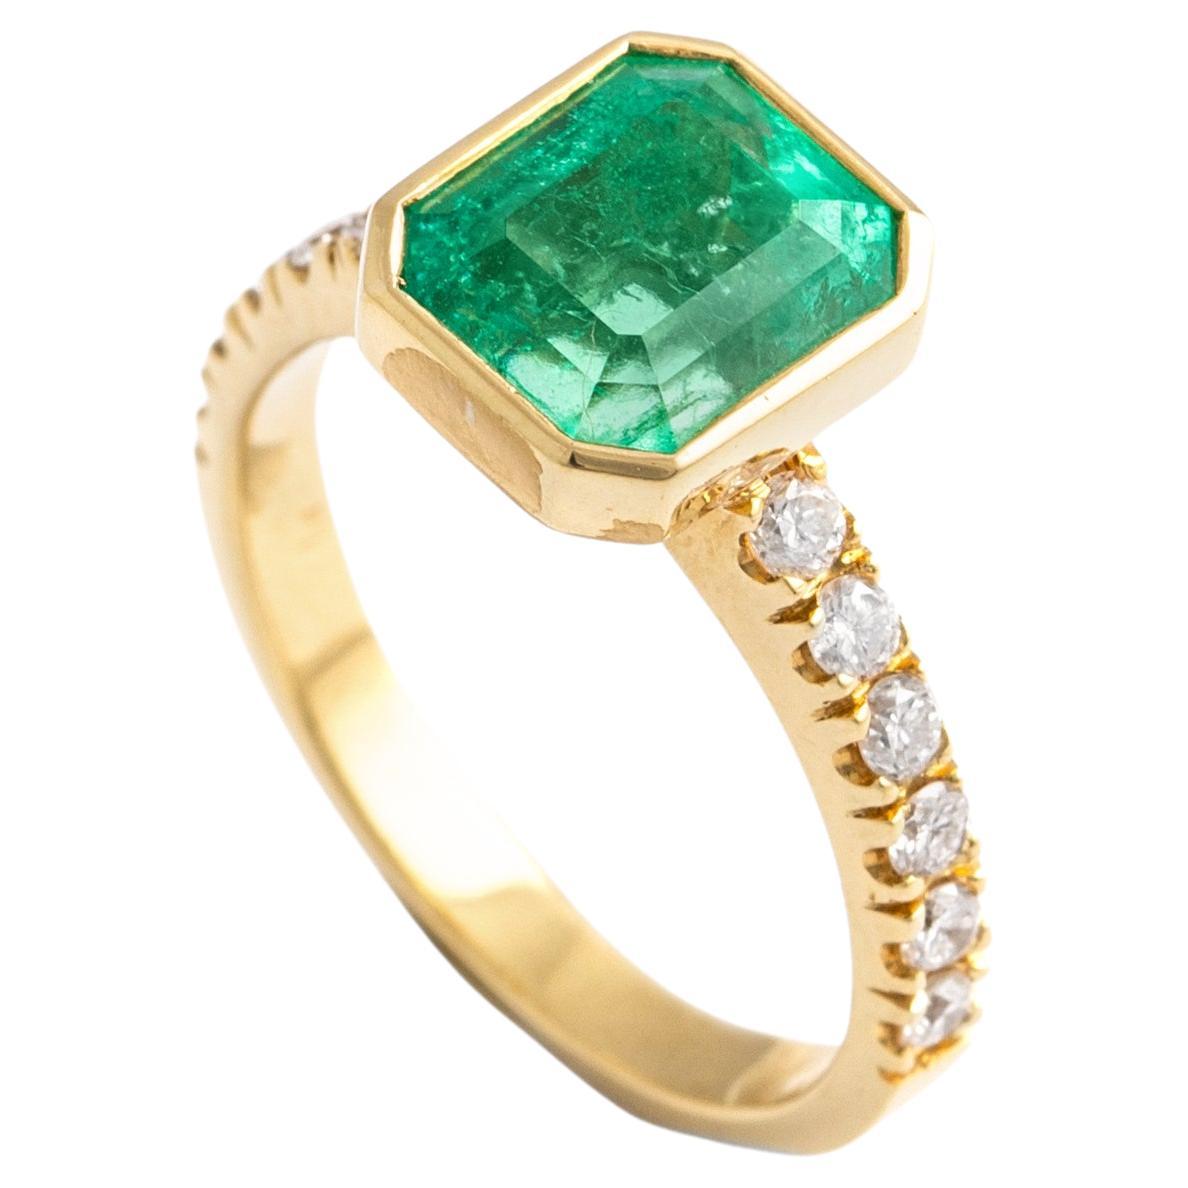 3.09 Carat Colombian Emerald Ring For Sale